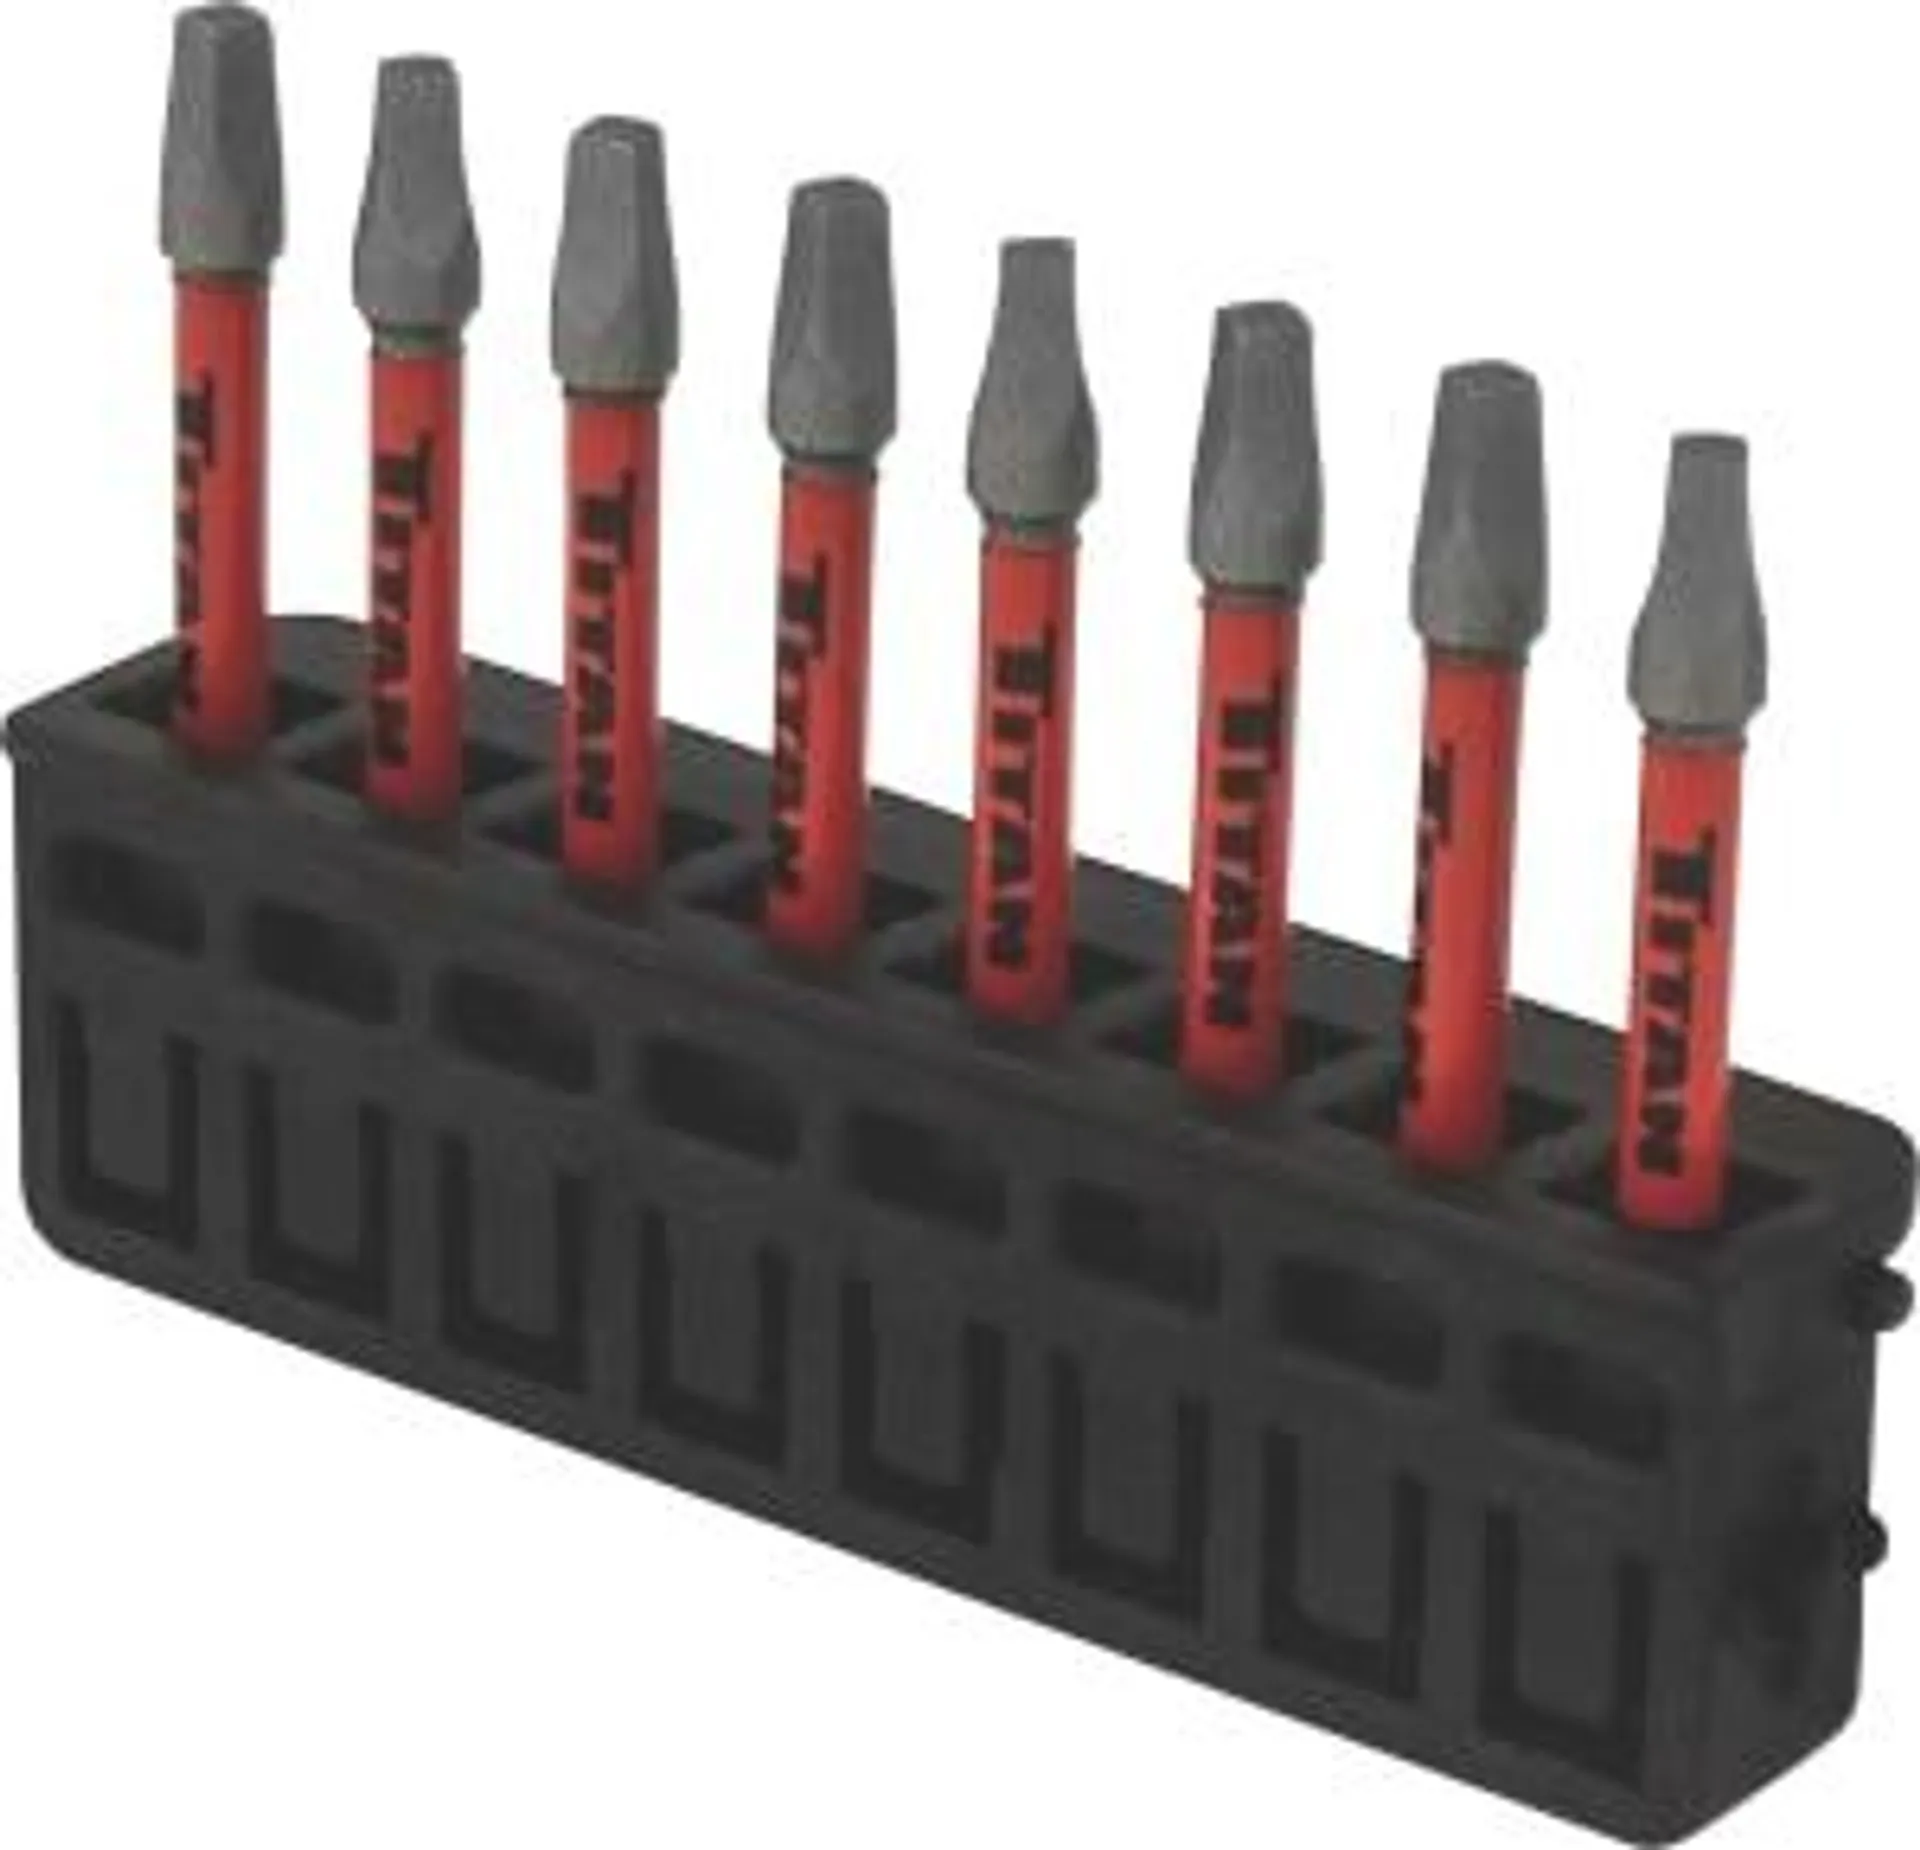 8 pc 2 in. #2 Square Power Impact Bits